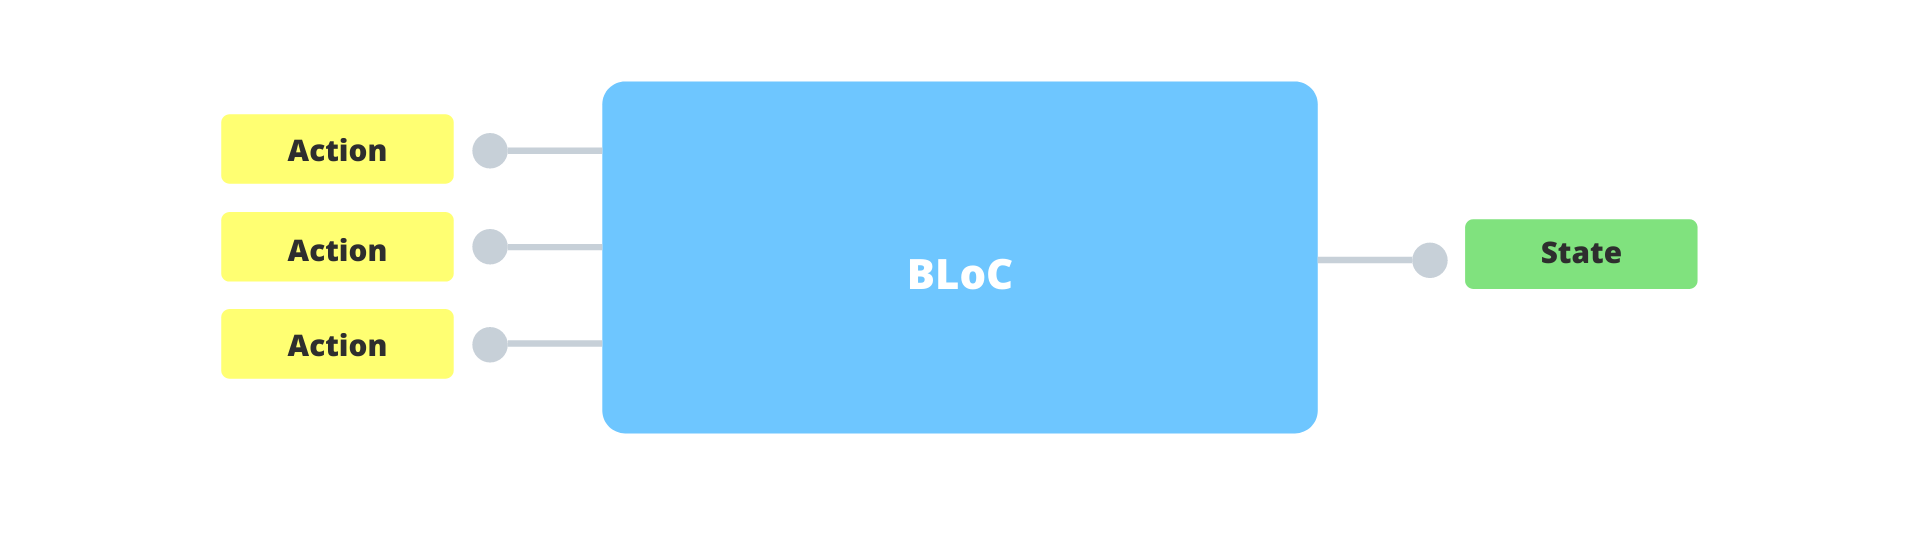 bloc-many-inputs-one-output